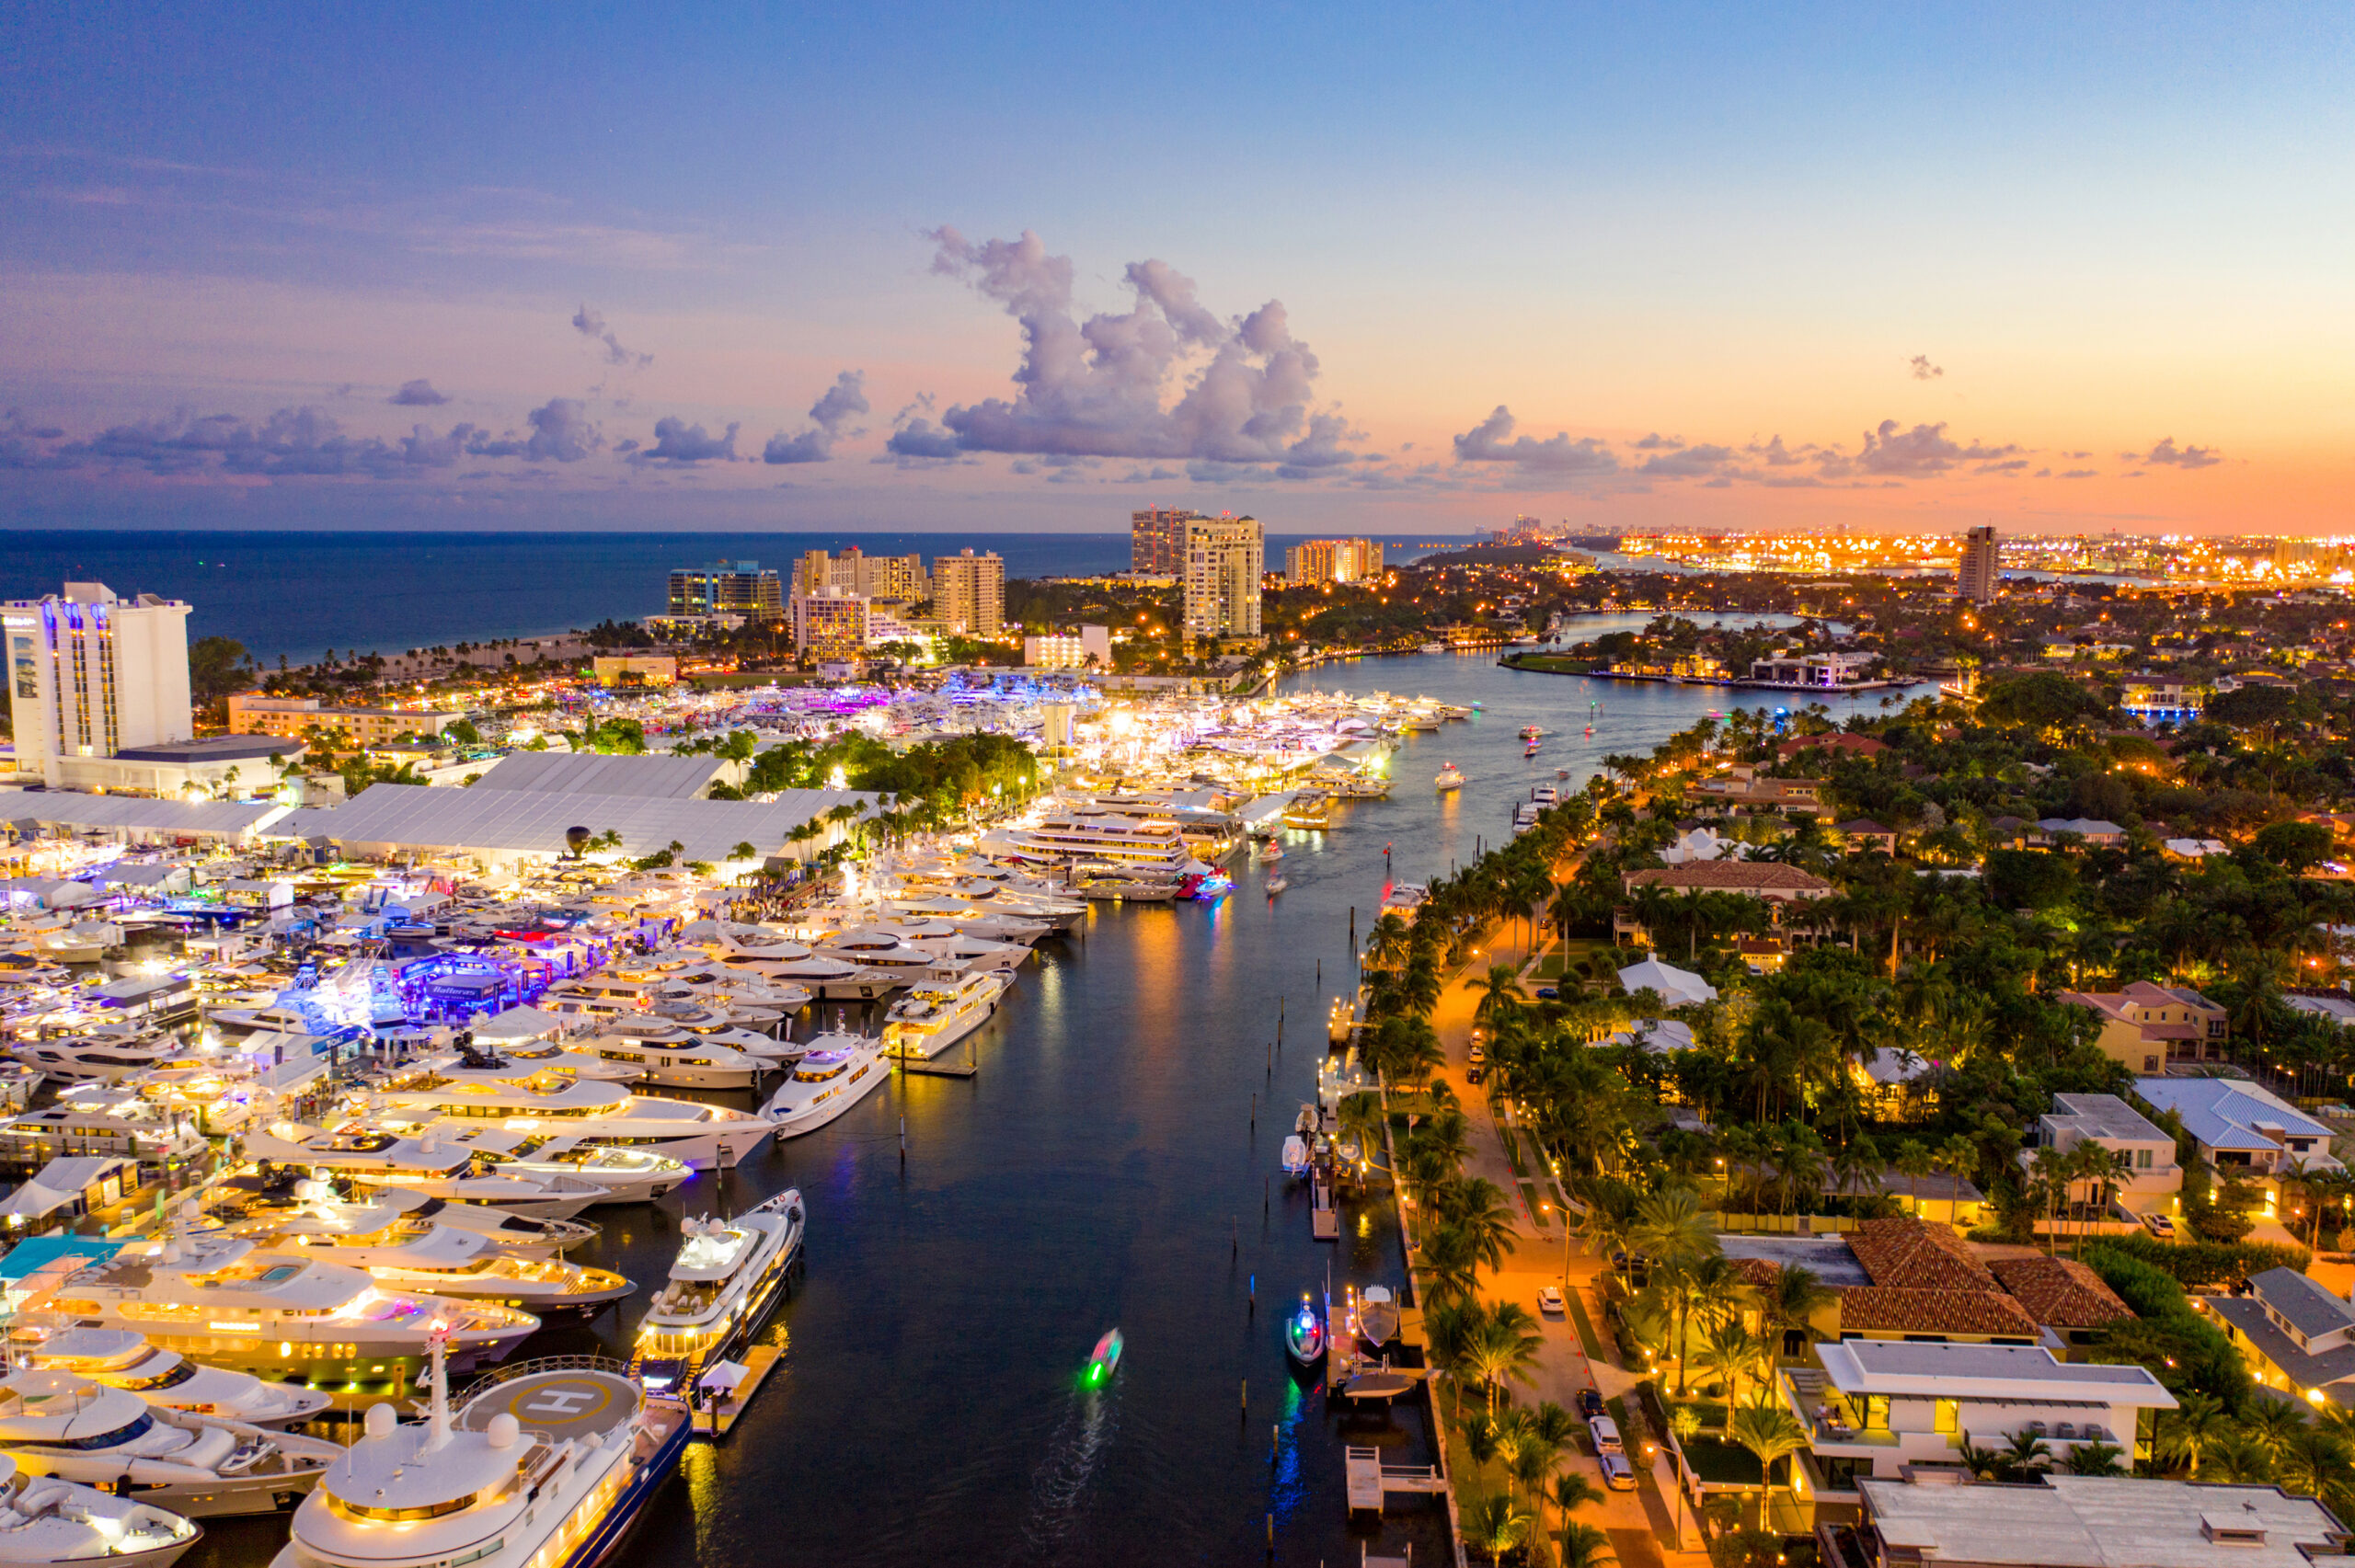 Fort Lauderdale Canals a Comprehensive Guide to Width, Depth, and Setbacks